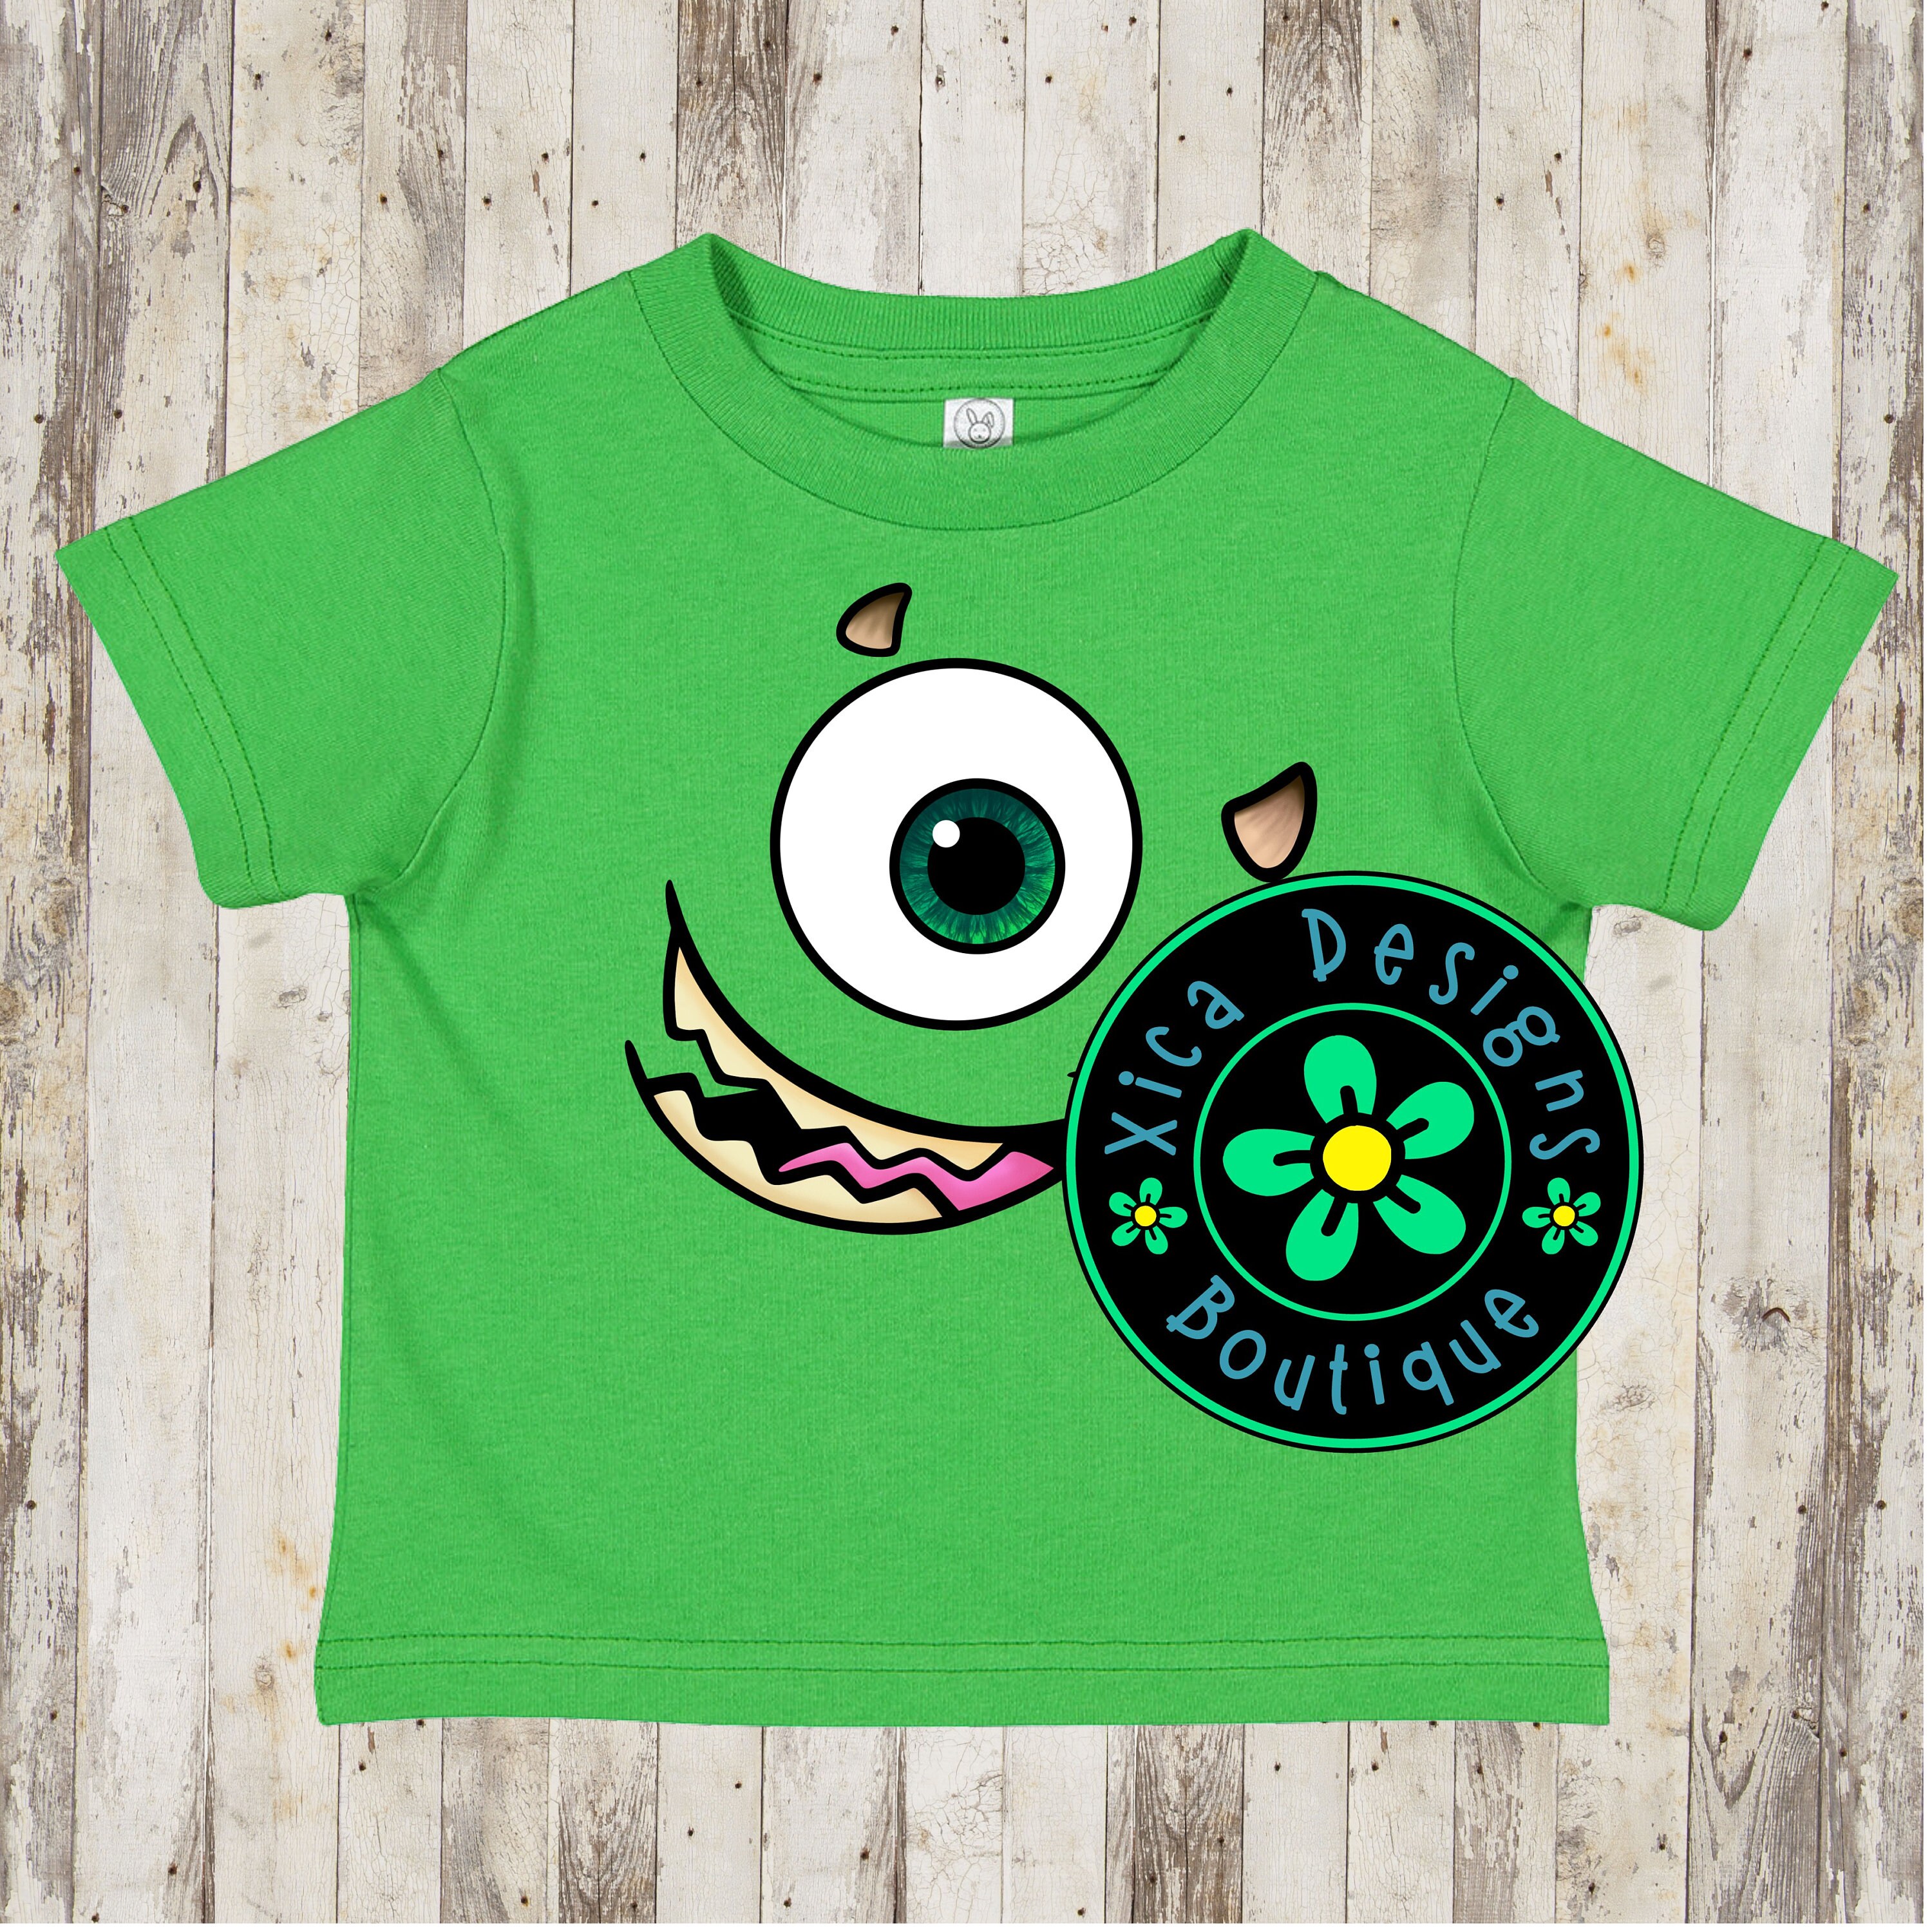 Monsters Ink Sully - Monsters, Inc. T-Shirt - The Shirt List